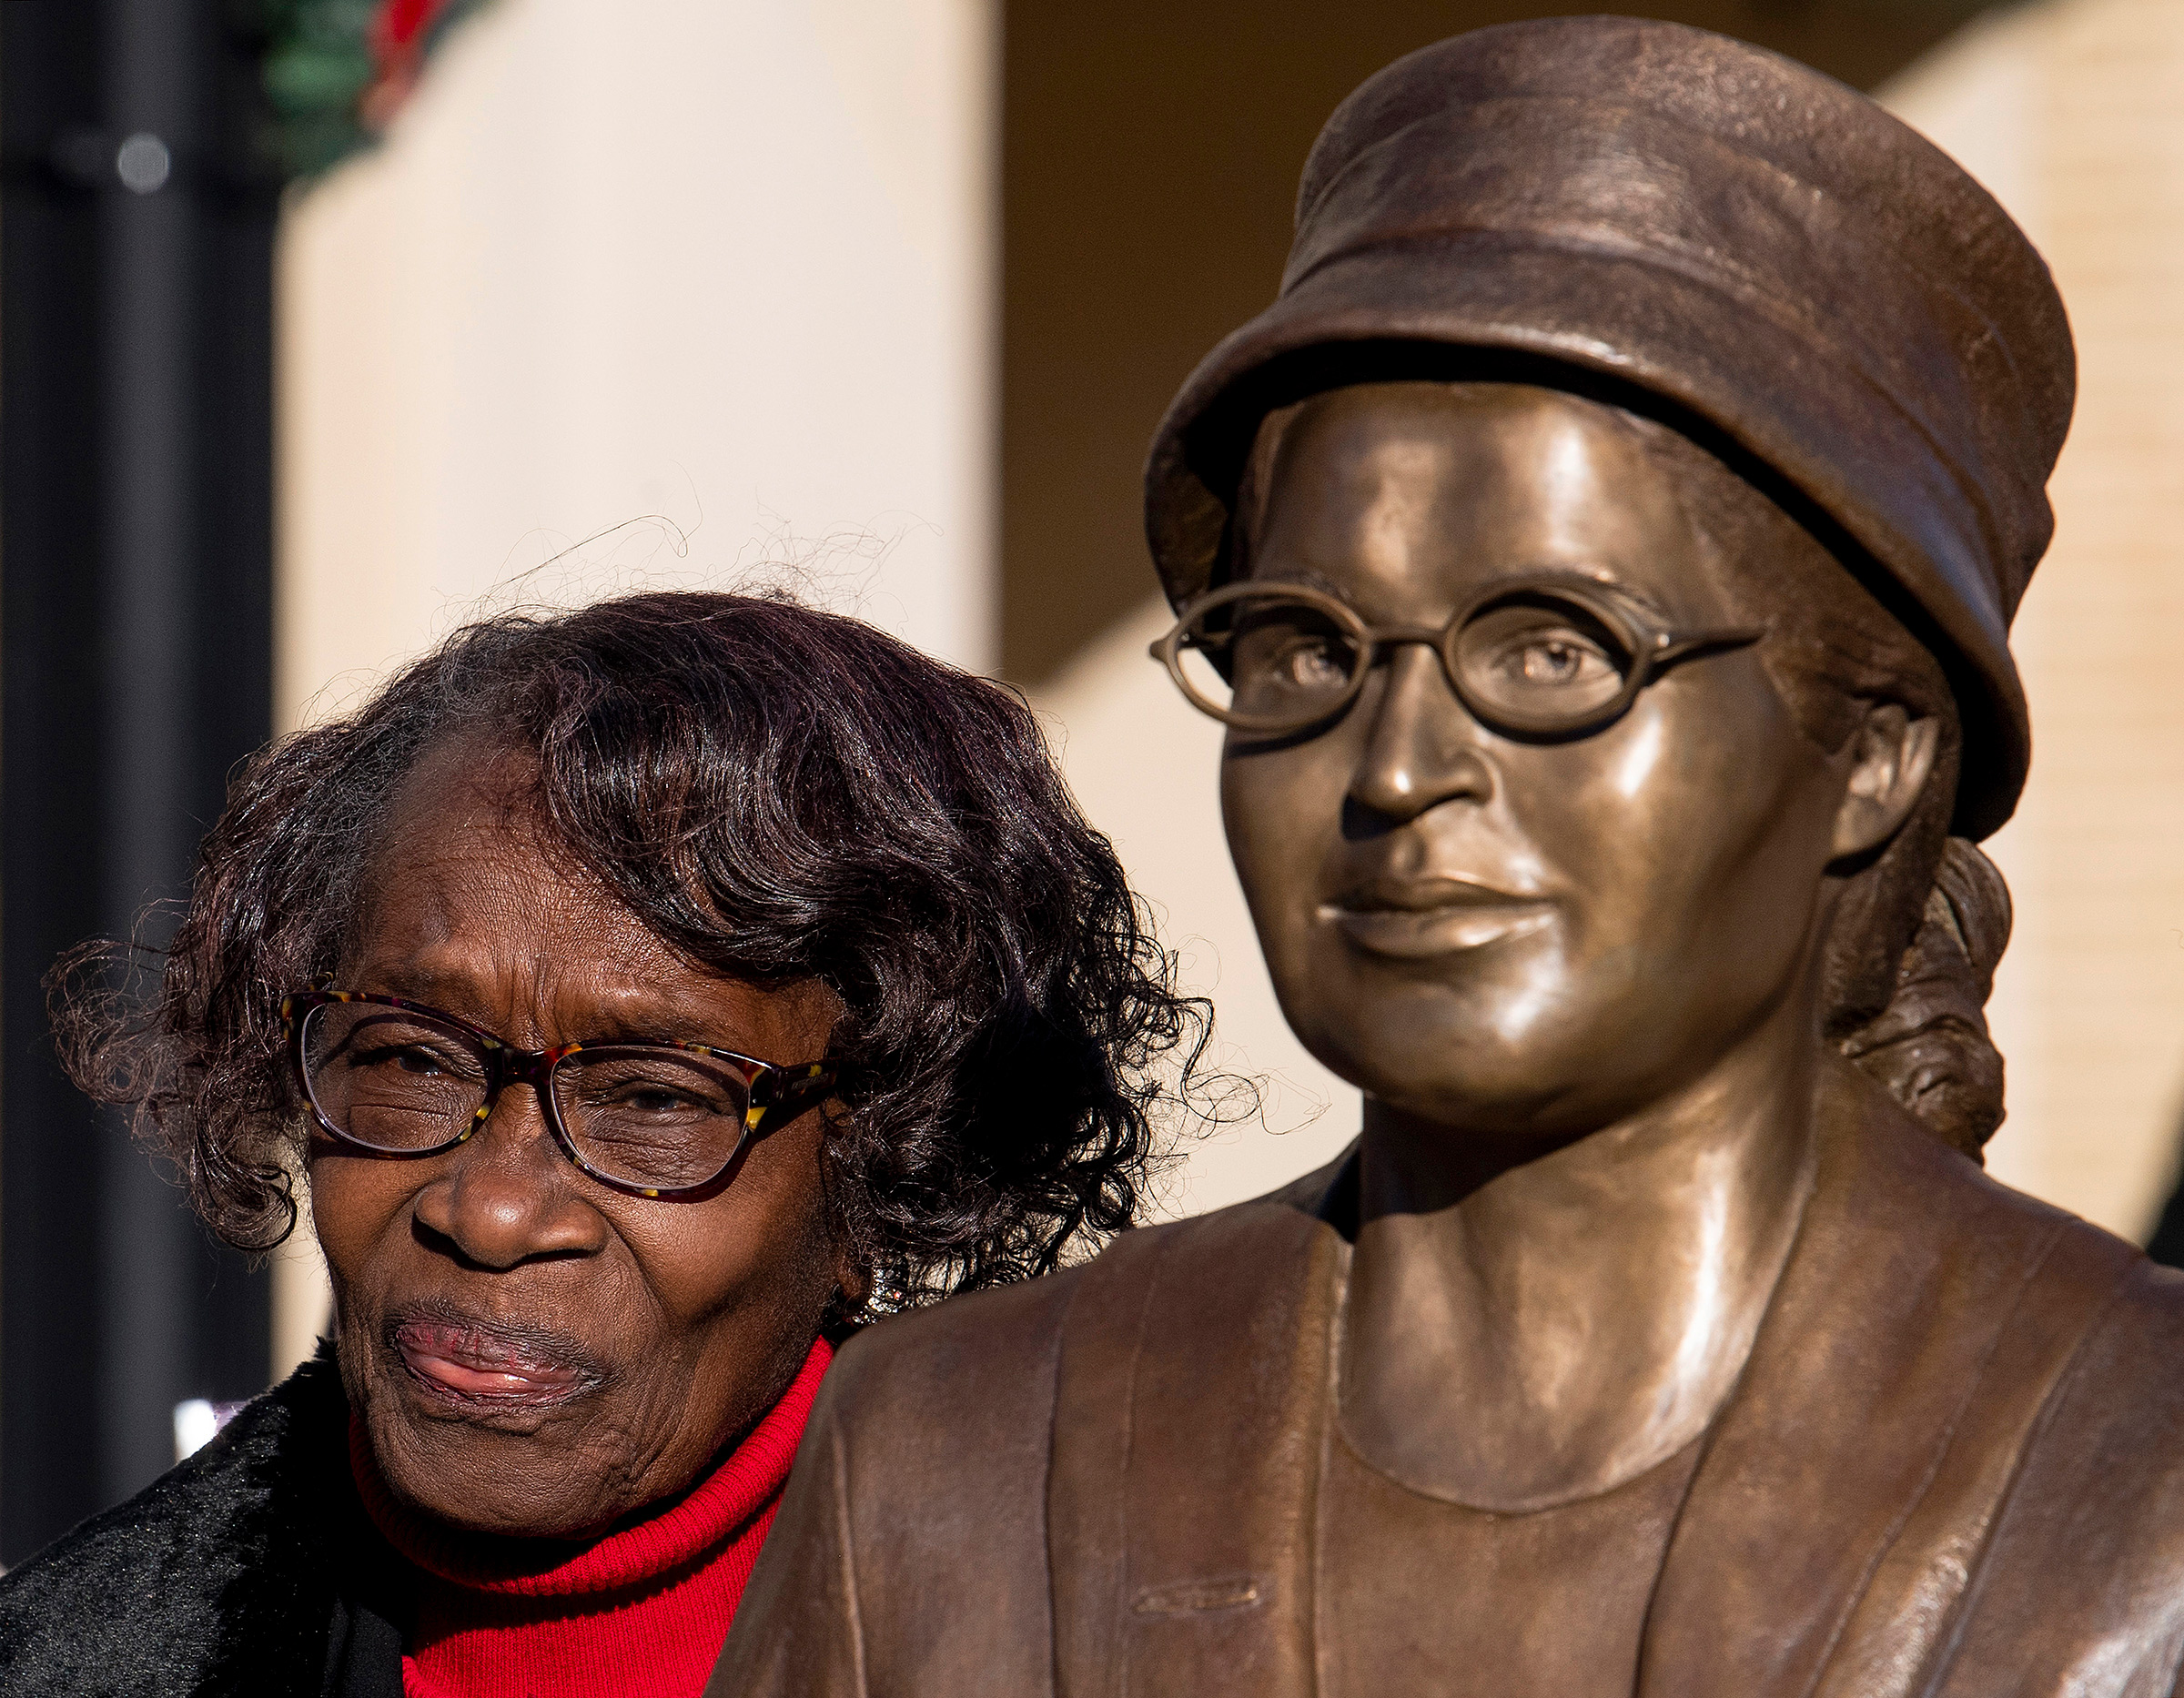 Mary Louise Smith, a plaintiff in the Browder vs. Gayle case that desegregated buses in Montgomery, stands beside the Rosa Parks statue after its unveiling event in downtown Montgomery, Ala., on Dec. 1, 2019, the anniversary of her arrest for not giving up her seat on a city bus.